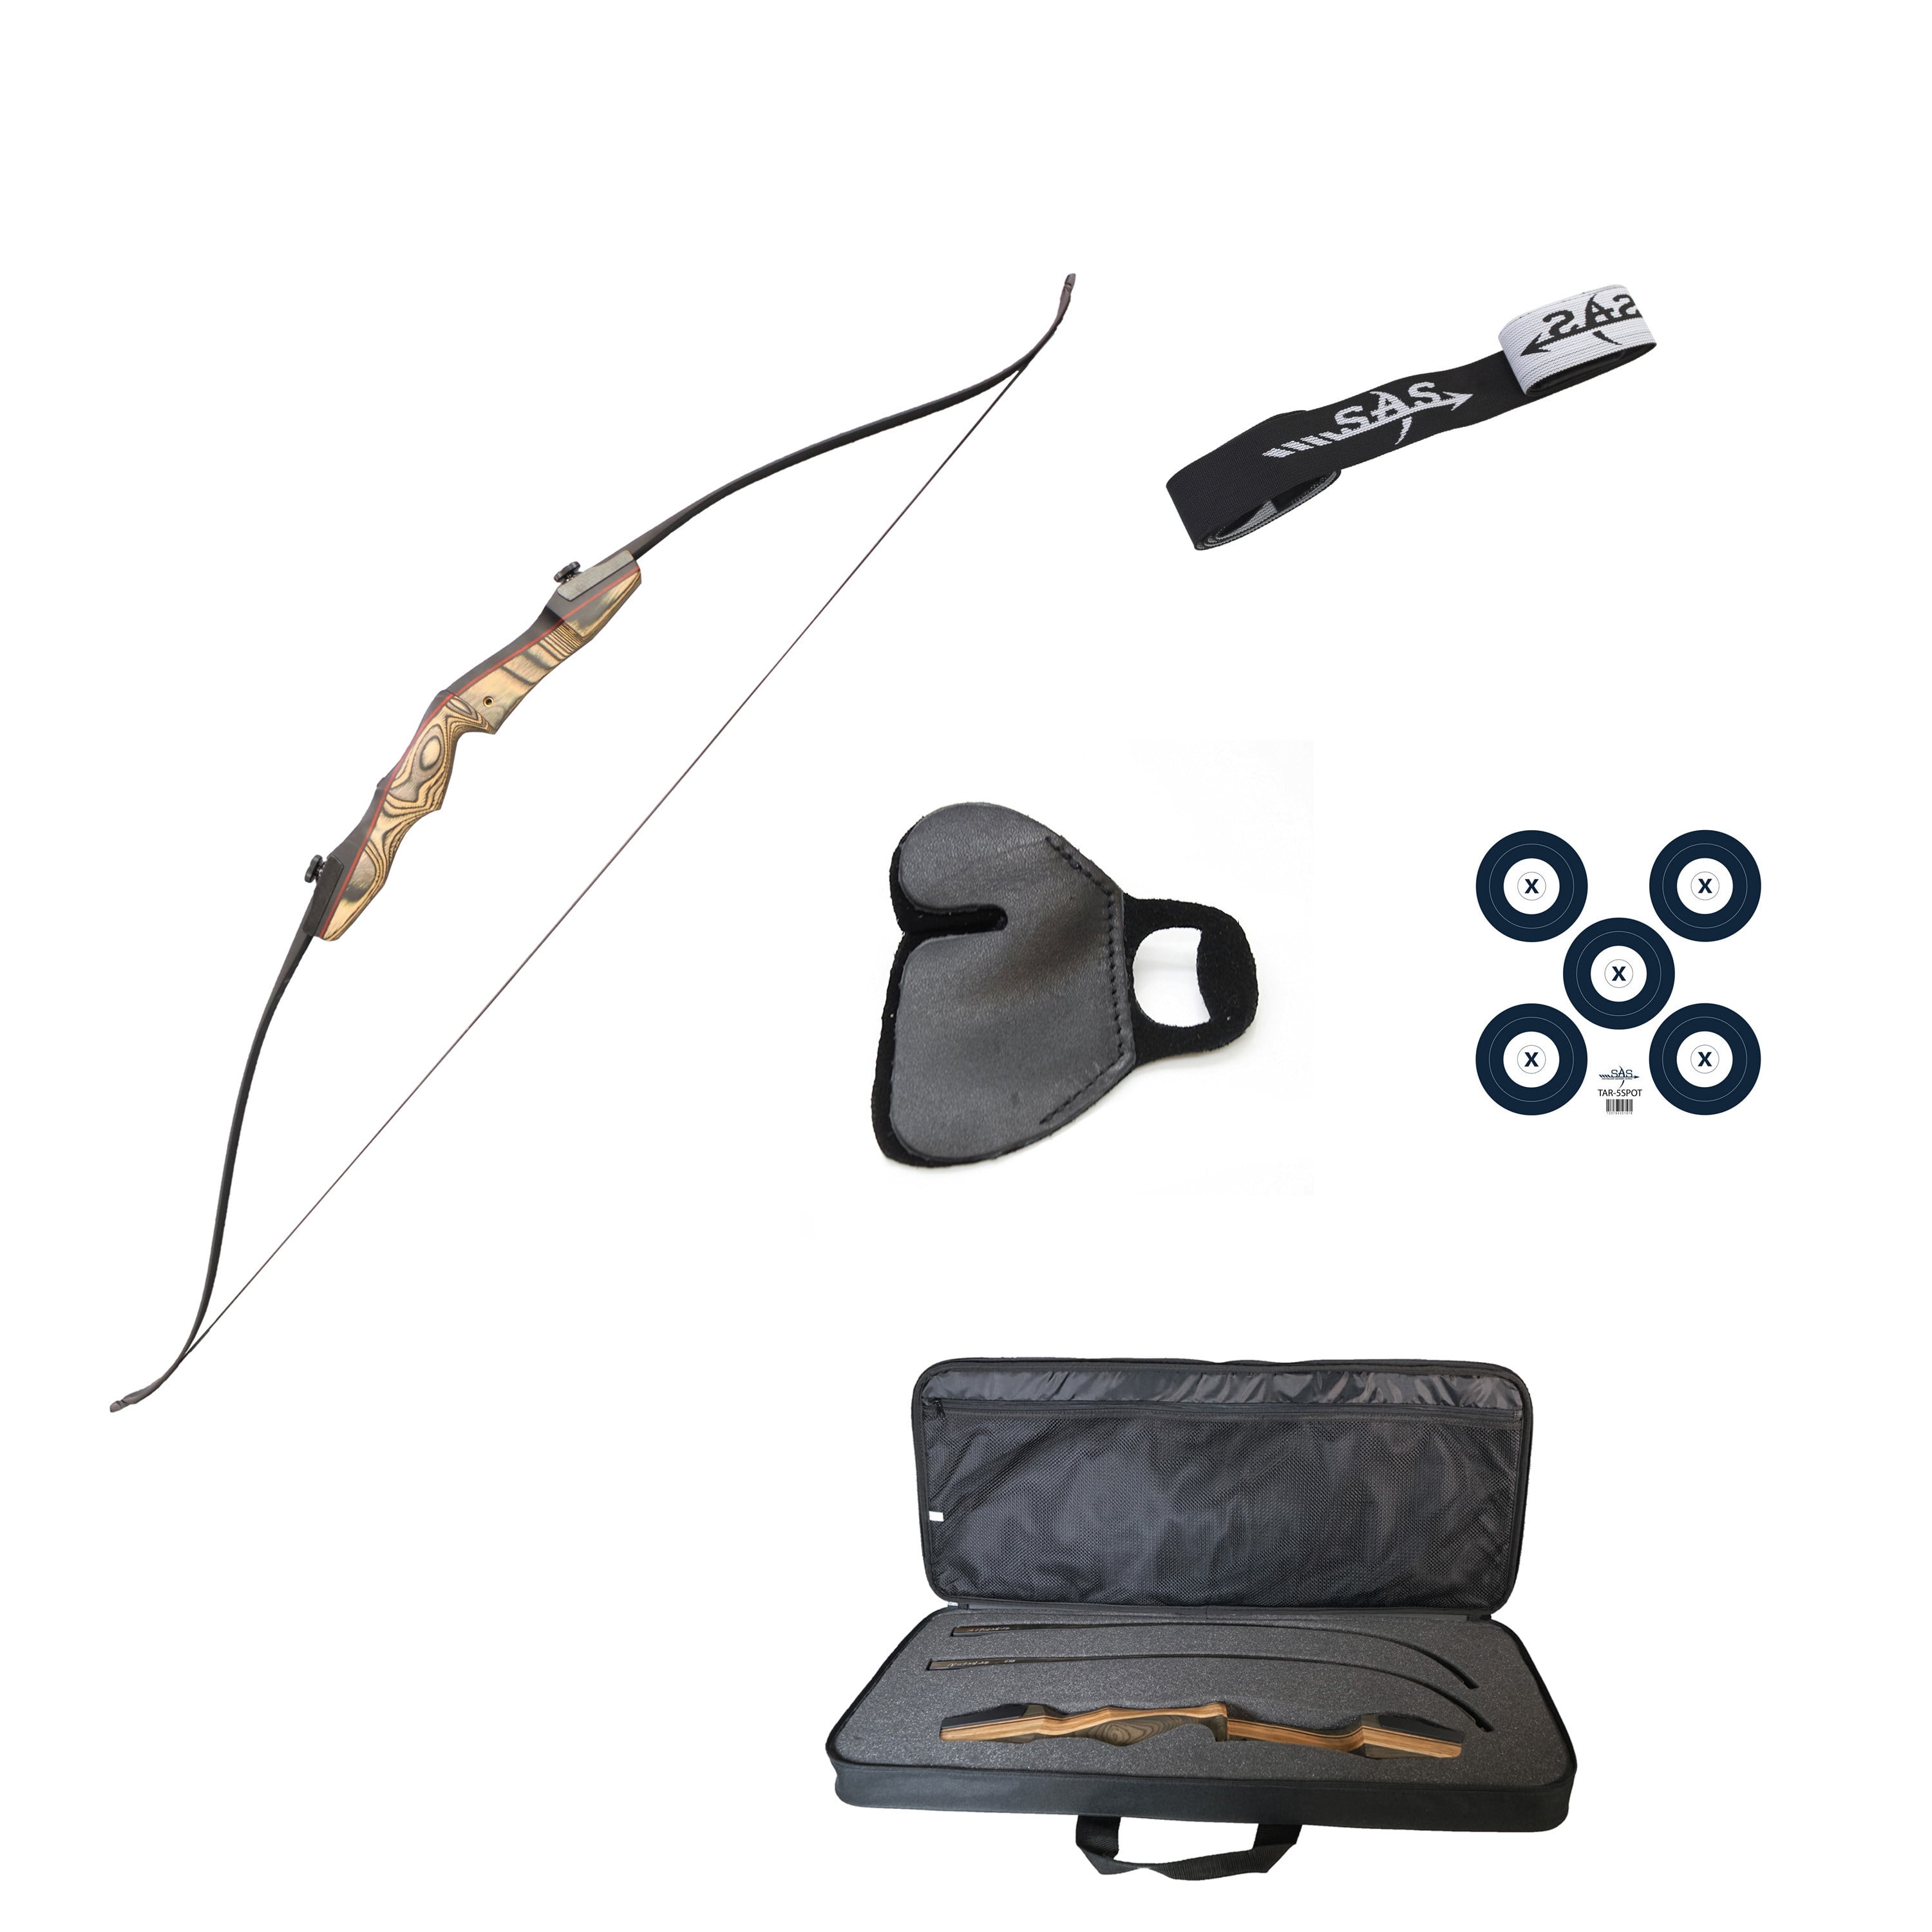 SAS Sage Take Down Recurve Bow Travel Package Kit with Hard Case Accessory 